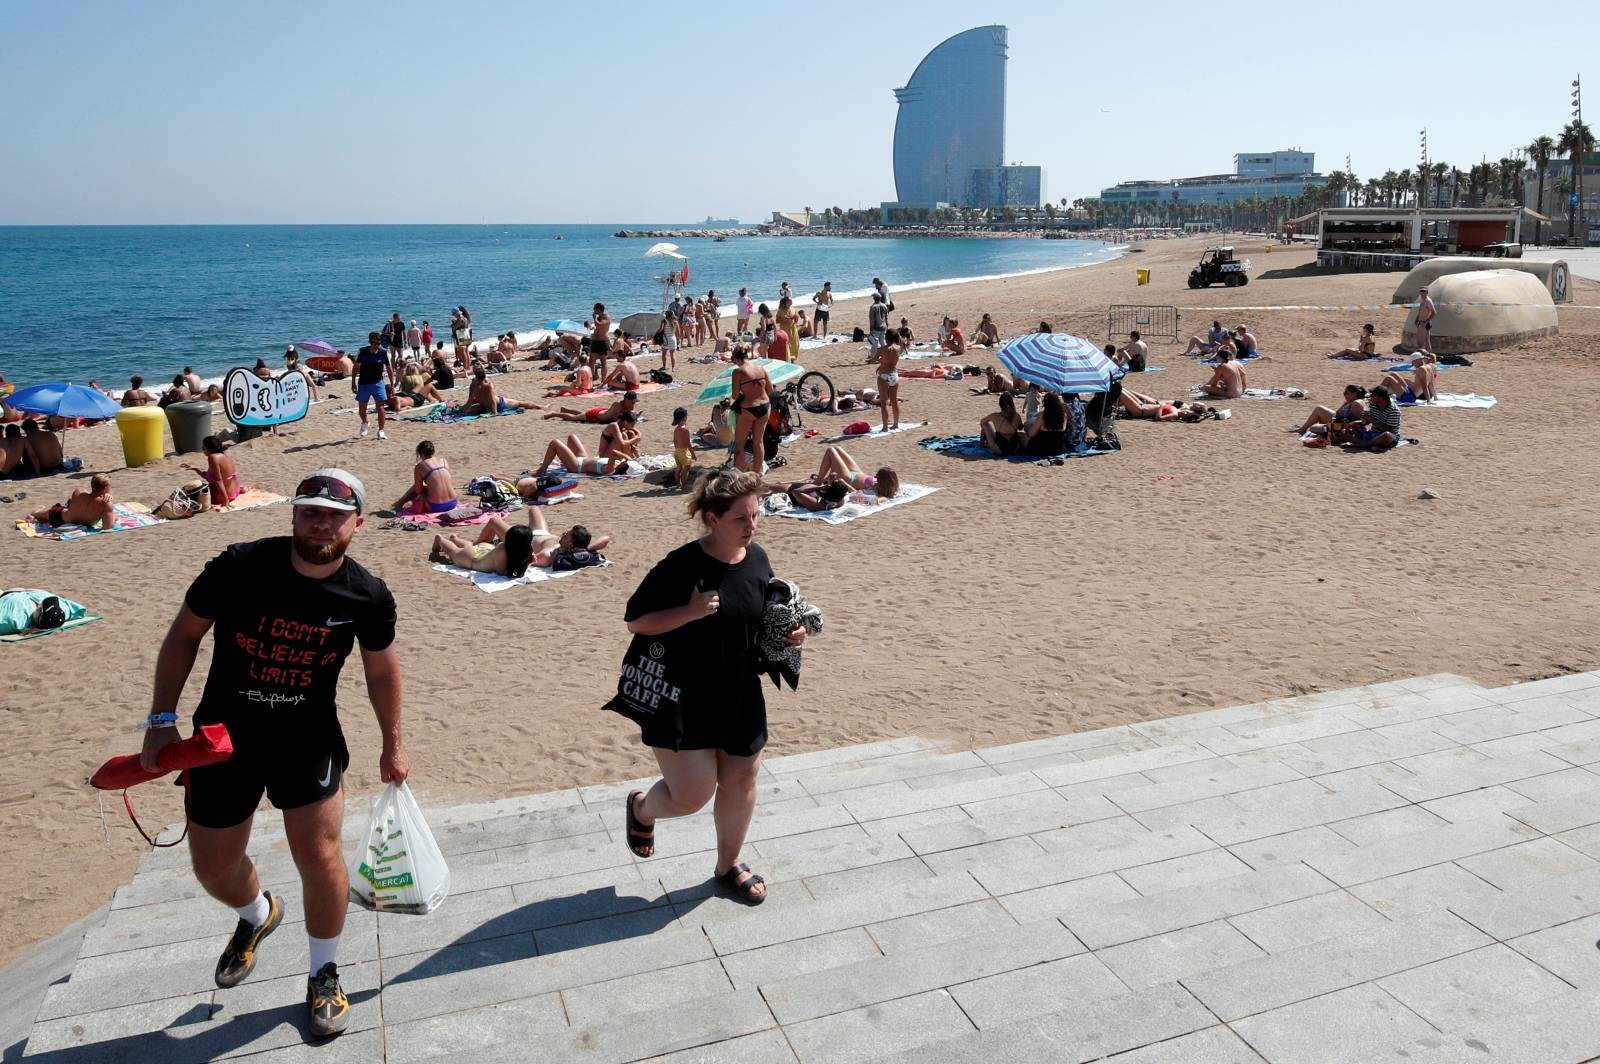 People leave Sant Sebastia beach after police found an explosive device in the water and evacuated part of it, in Barcelona